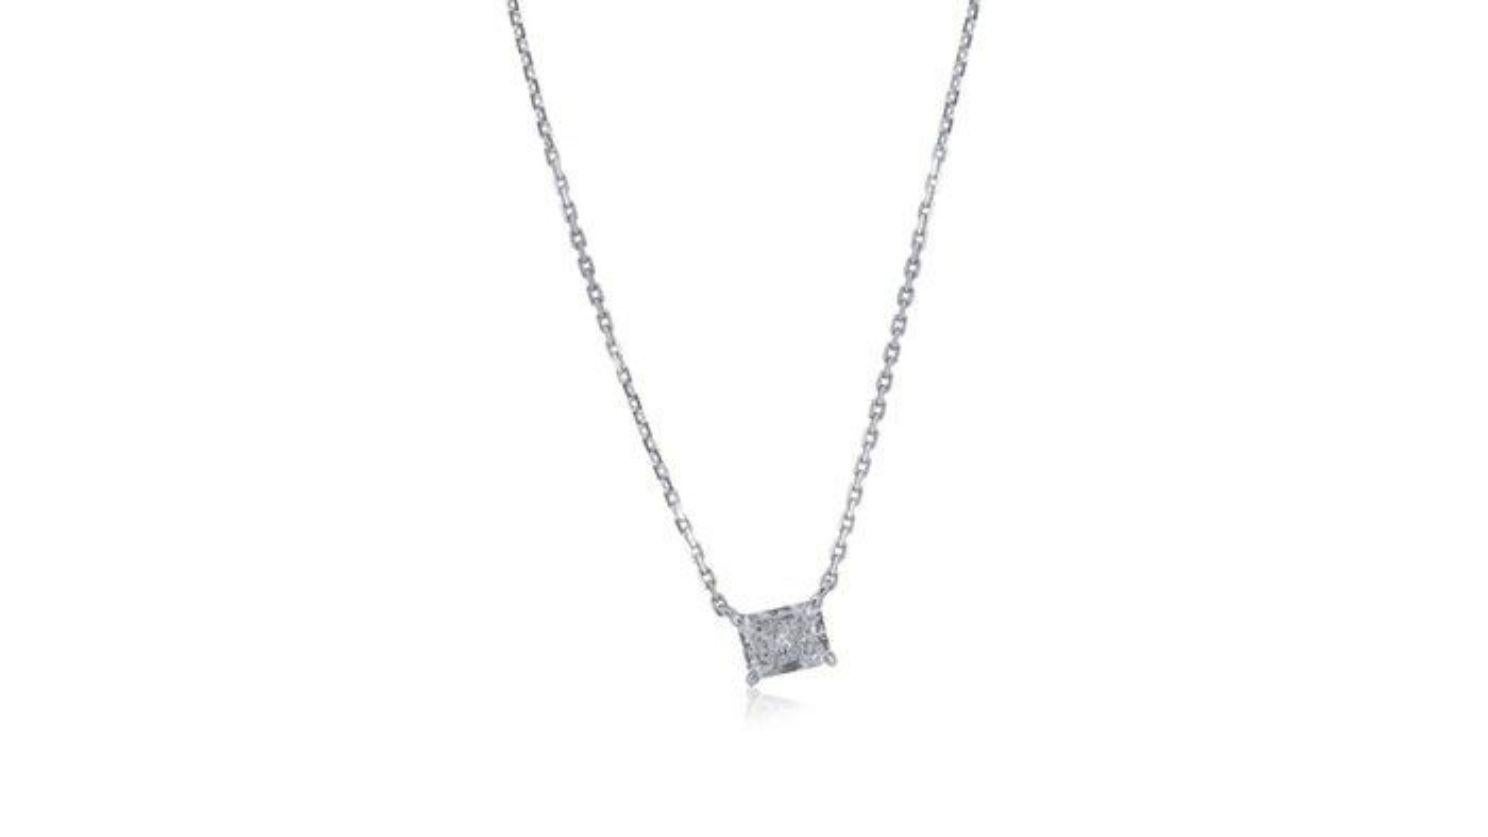 Radiant 0.90ct Solitaire Diamond Necklace set in 18K White Gold